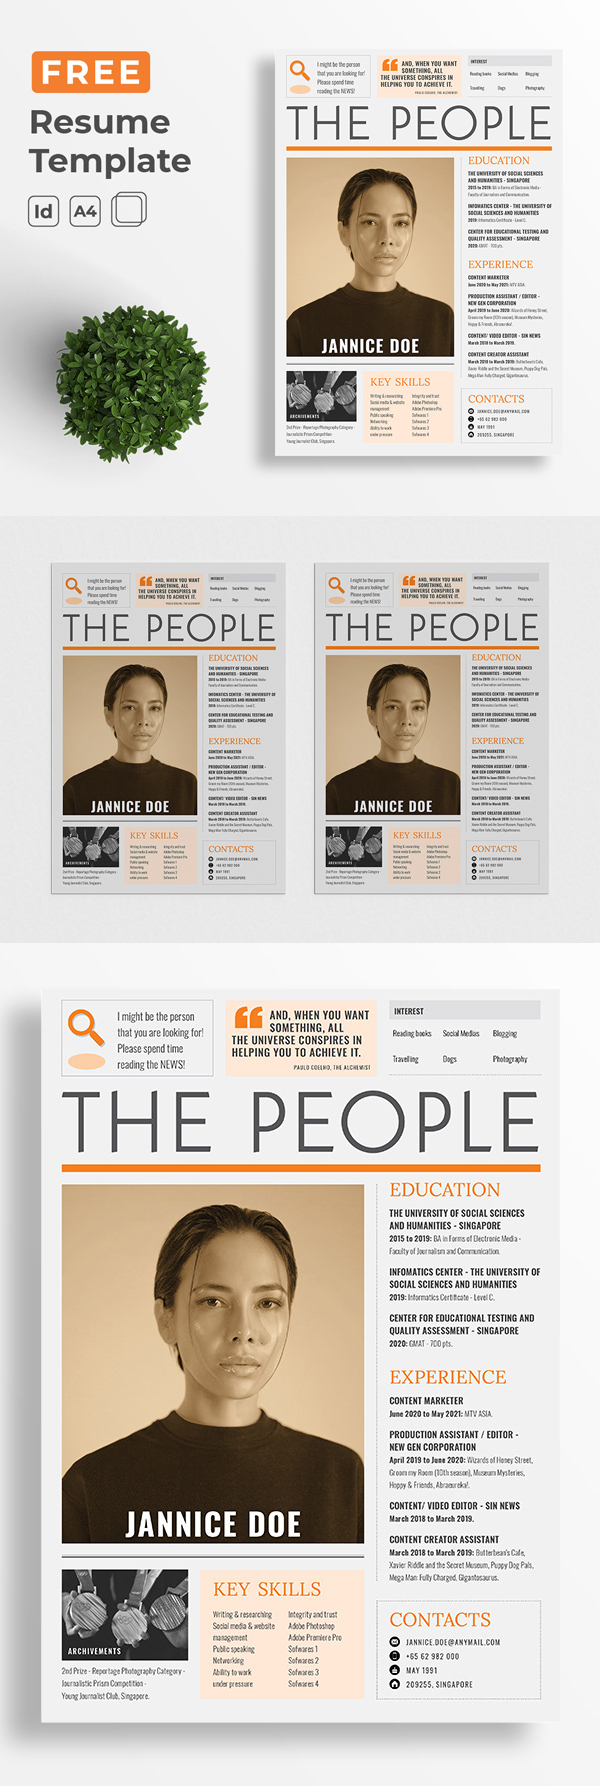 Free Resume Template Newspaper Cover